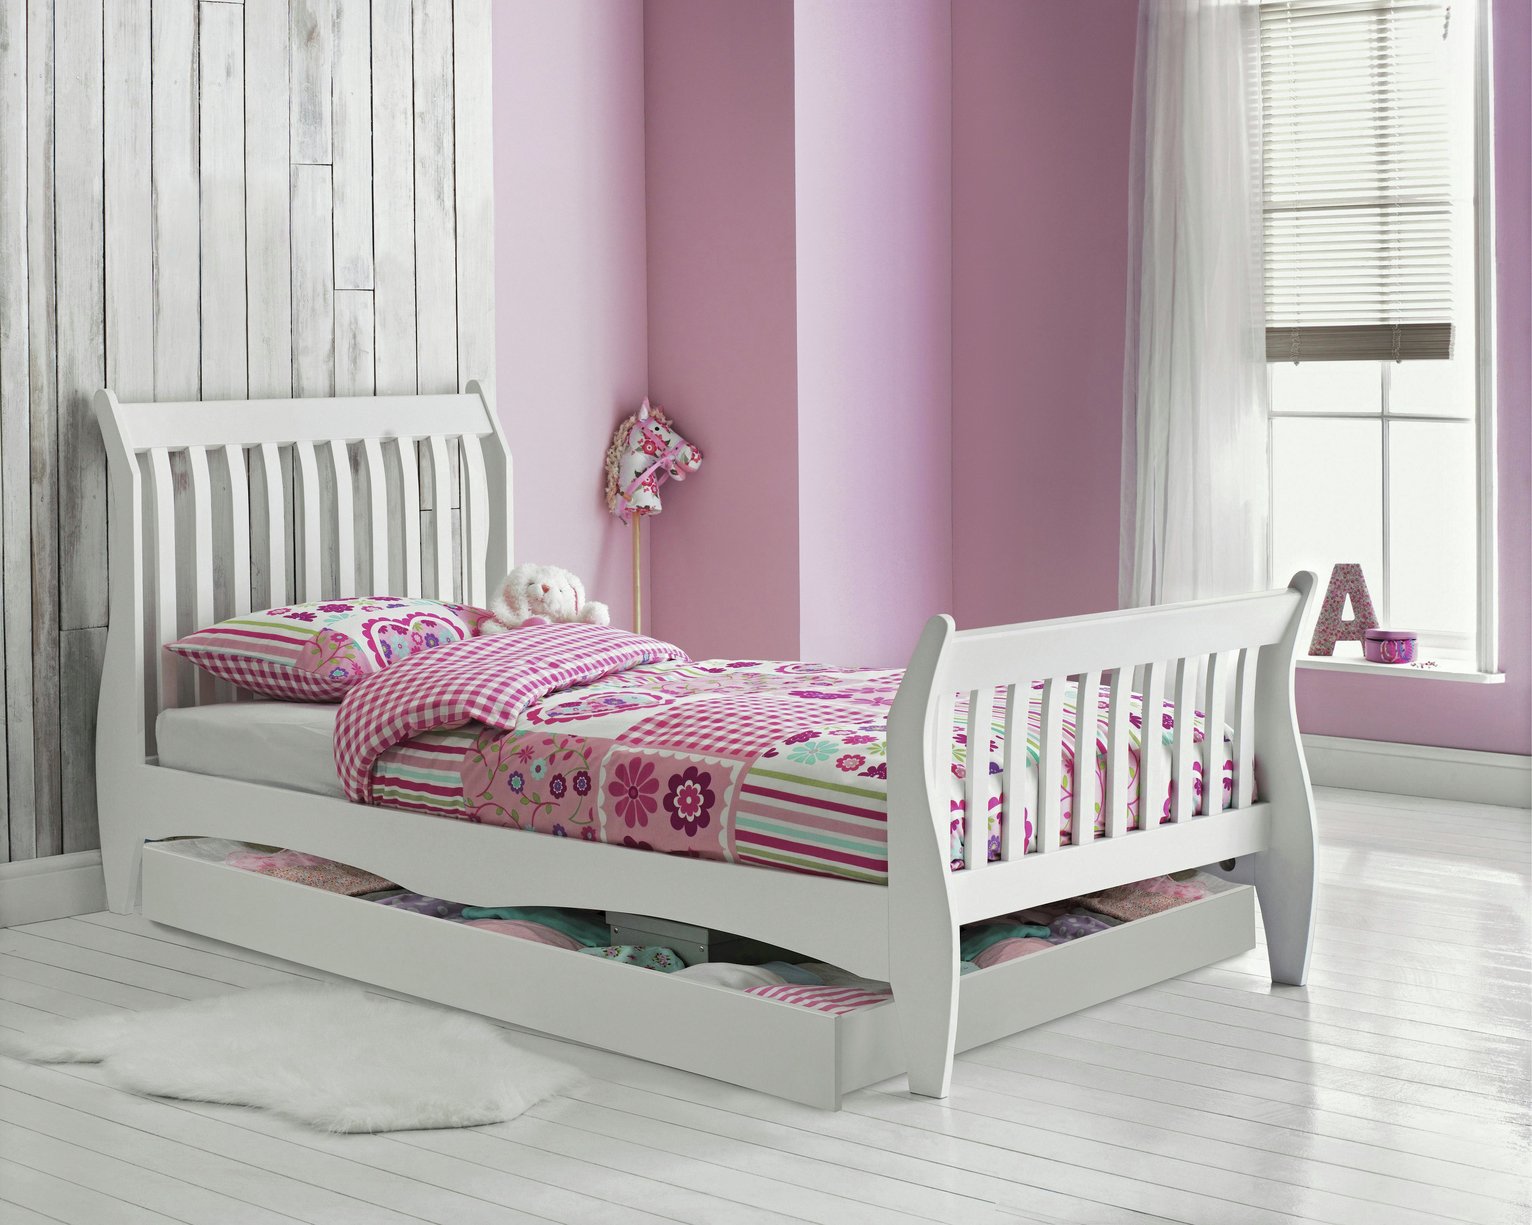 Argos Home Daisy Single Bed, Drawer and Mattress - White